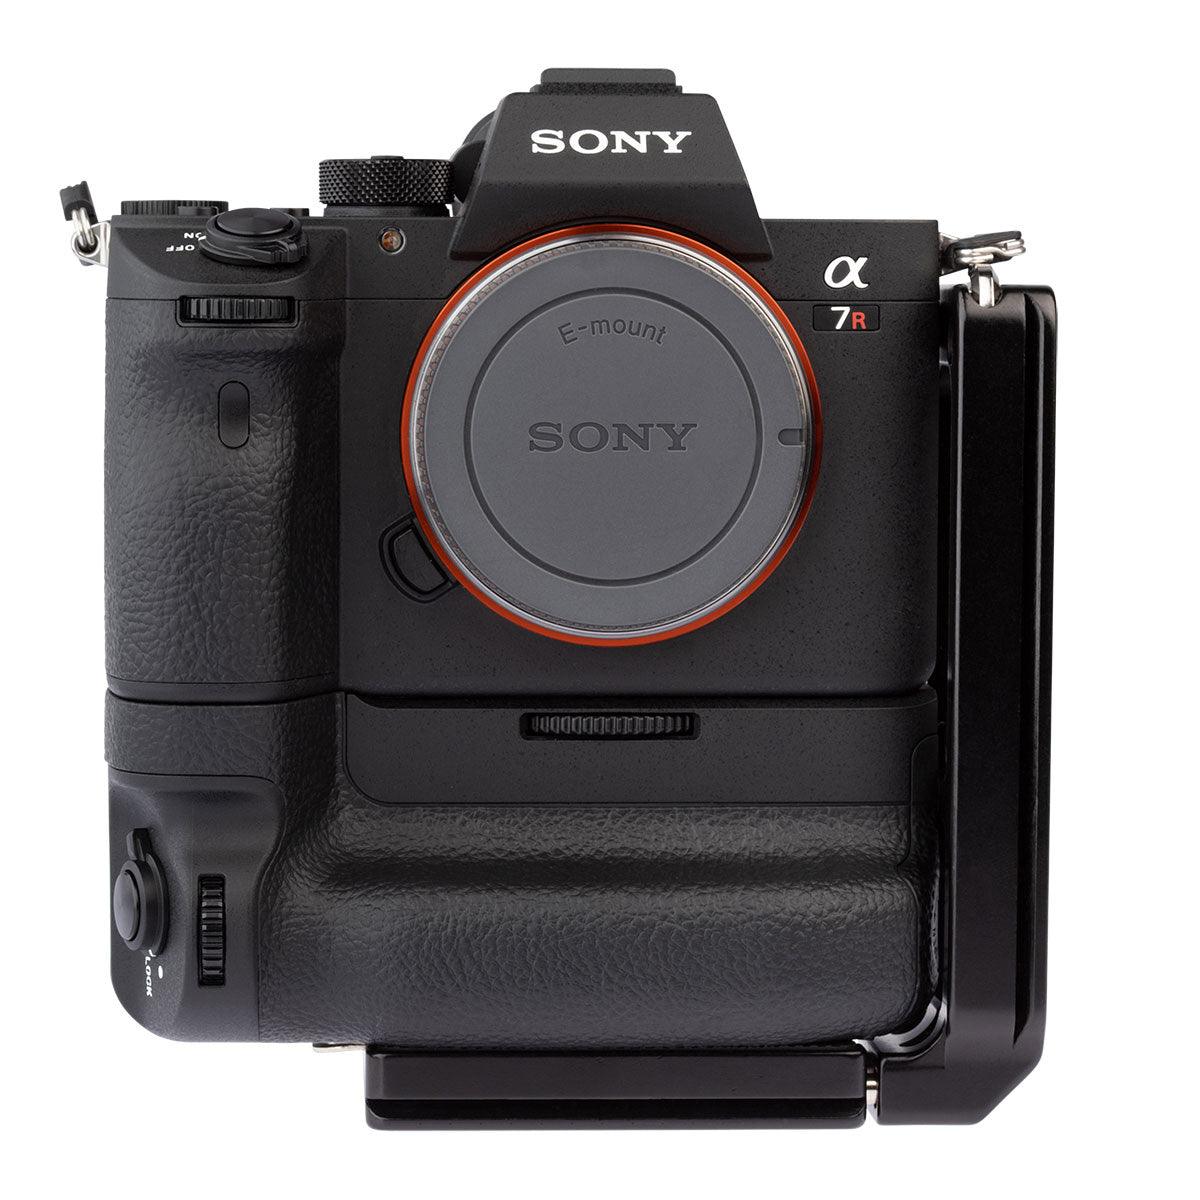 Mounted to Sony A7r III with VGC3EM Battery Grip